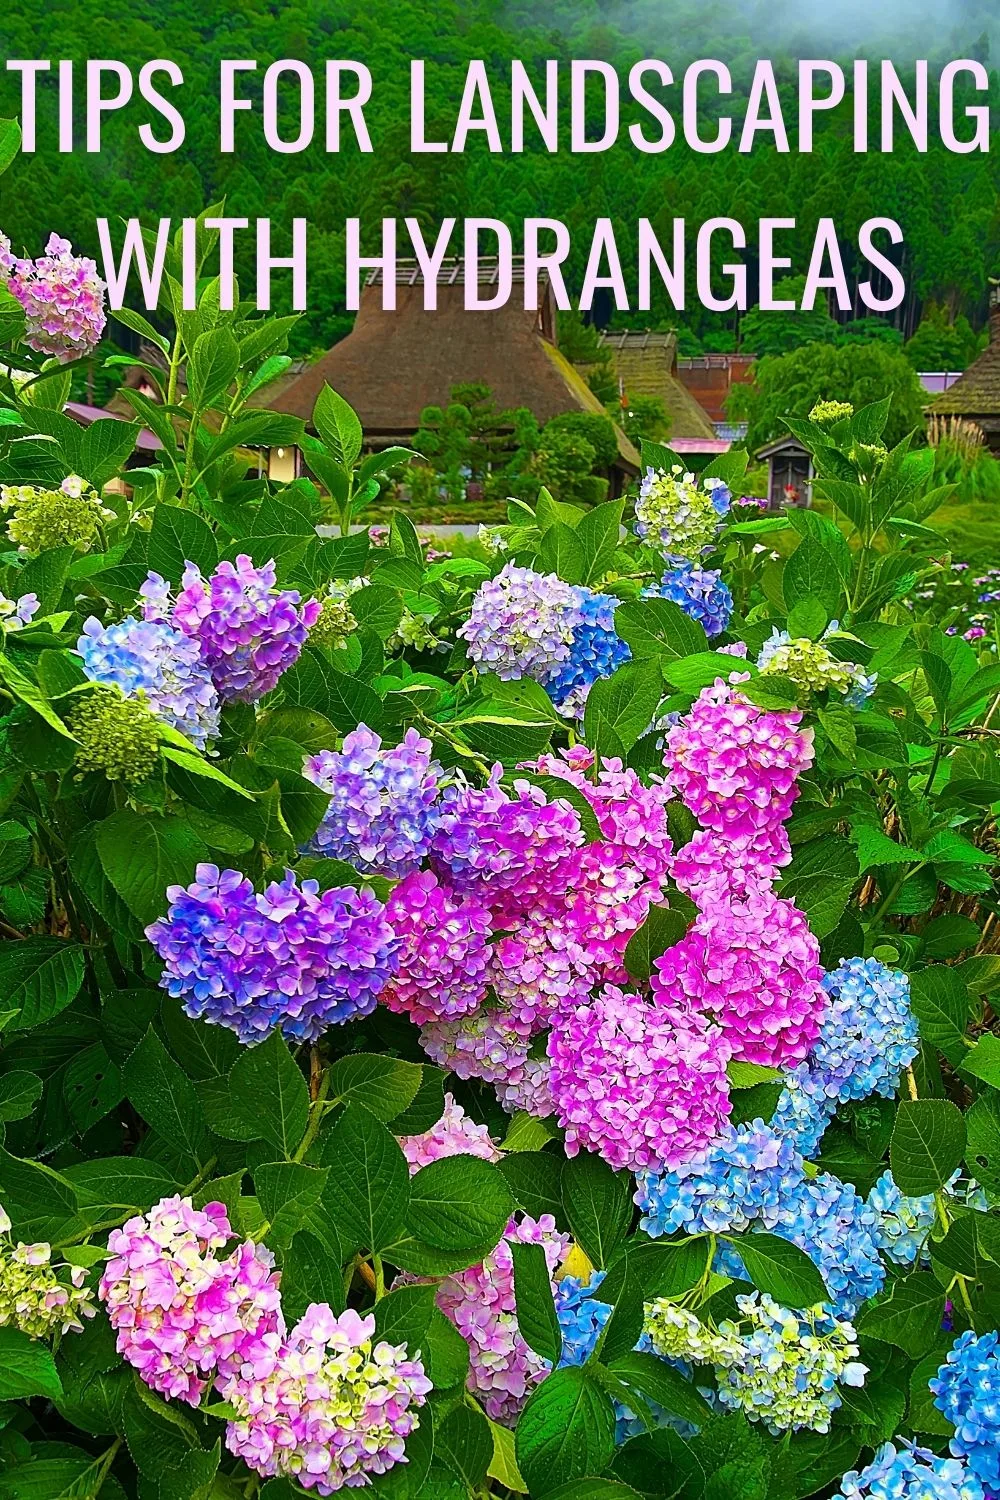 Tips for landscaping with hydrangeas